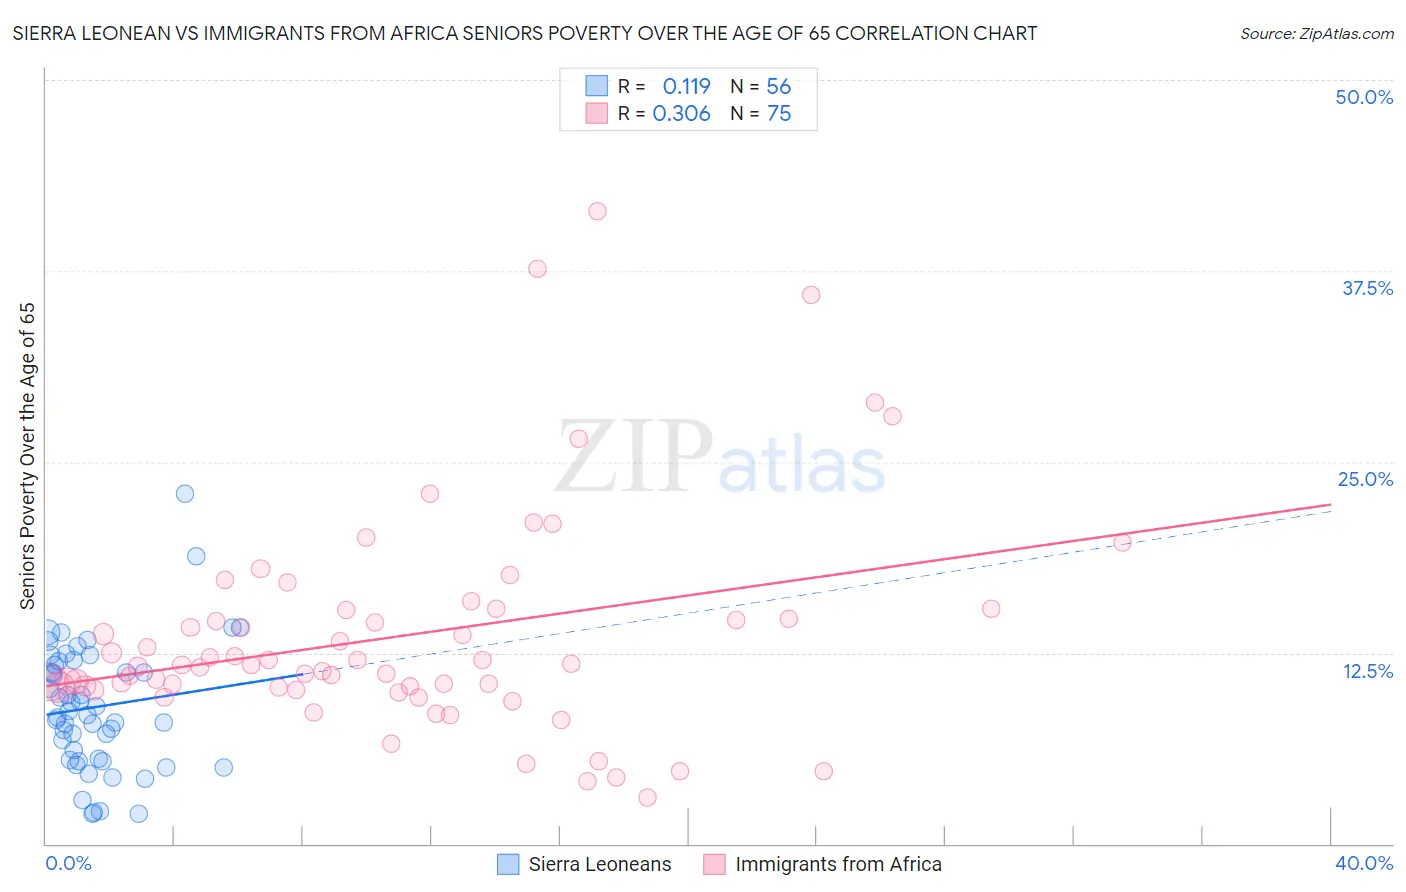 Sierra Leonean vs Immigrants from Africa Seniors Poverty Over the Age of 65